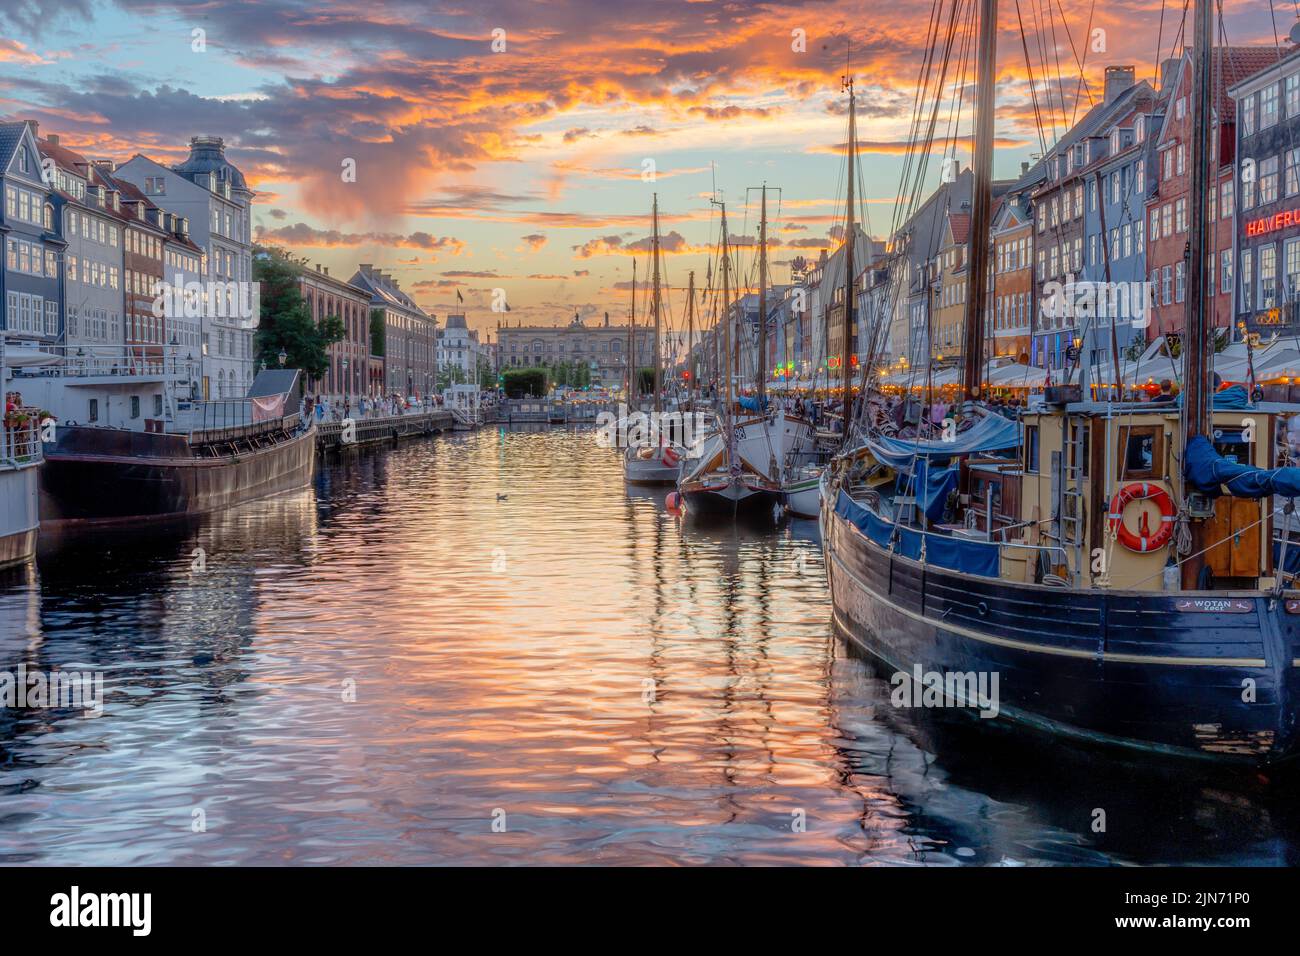 A beautiful shot of a famous tourist spot Nyhavn in Copenhagen with a waterscape and ducked boats Stock Photo